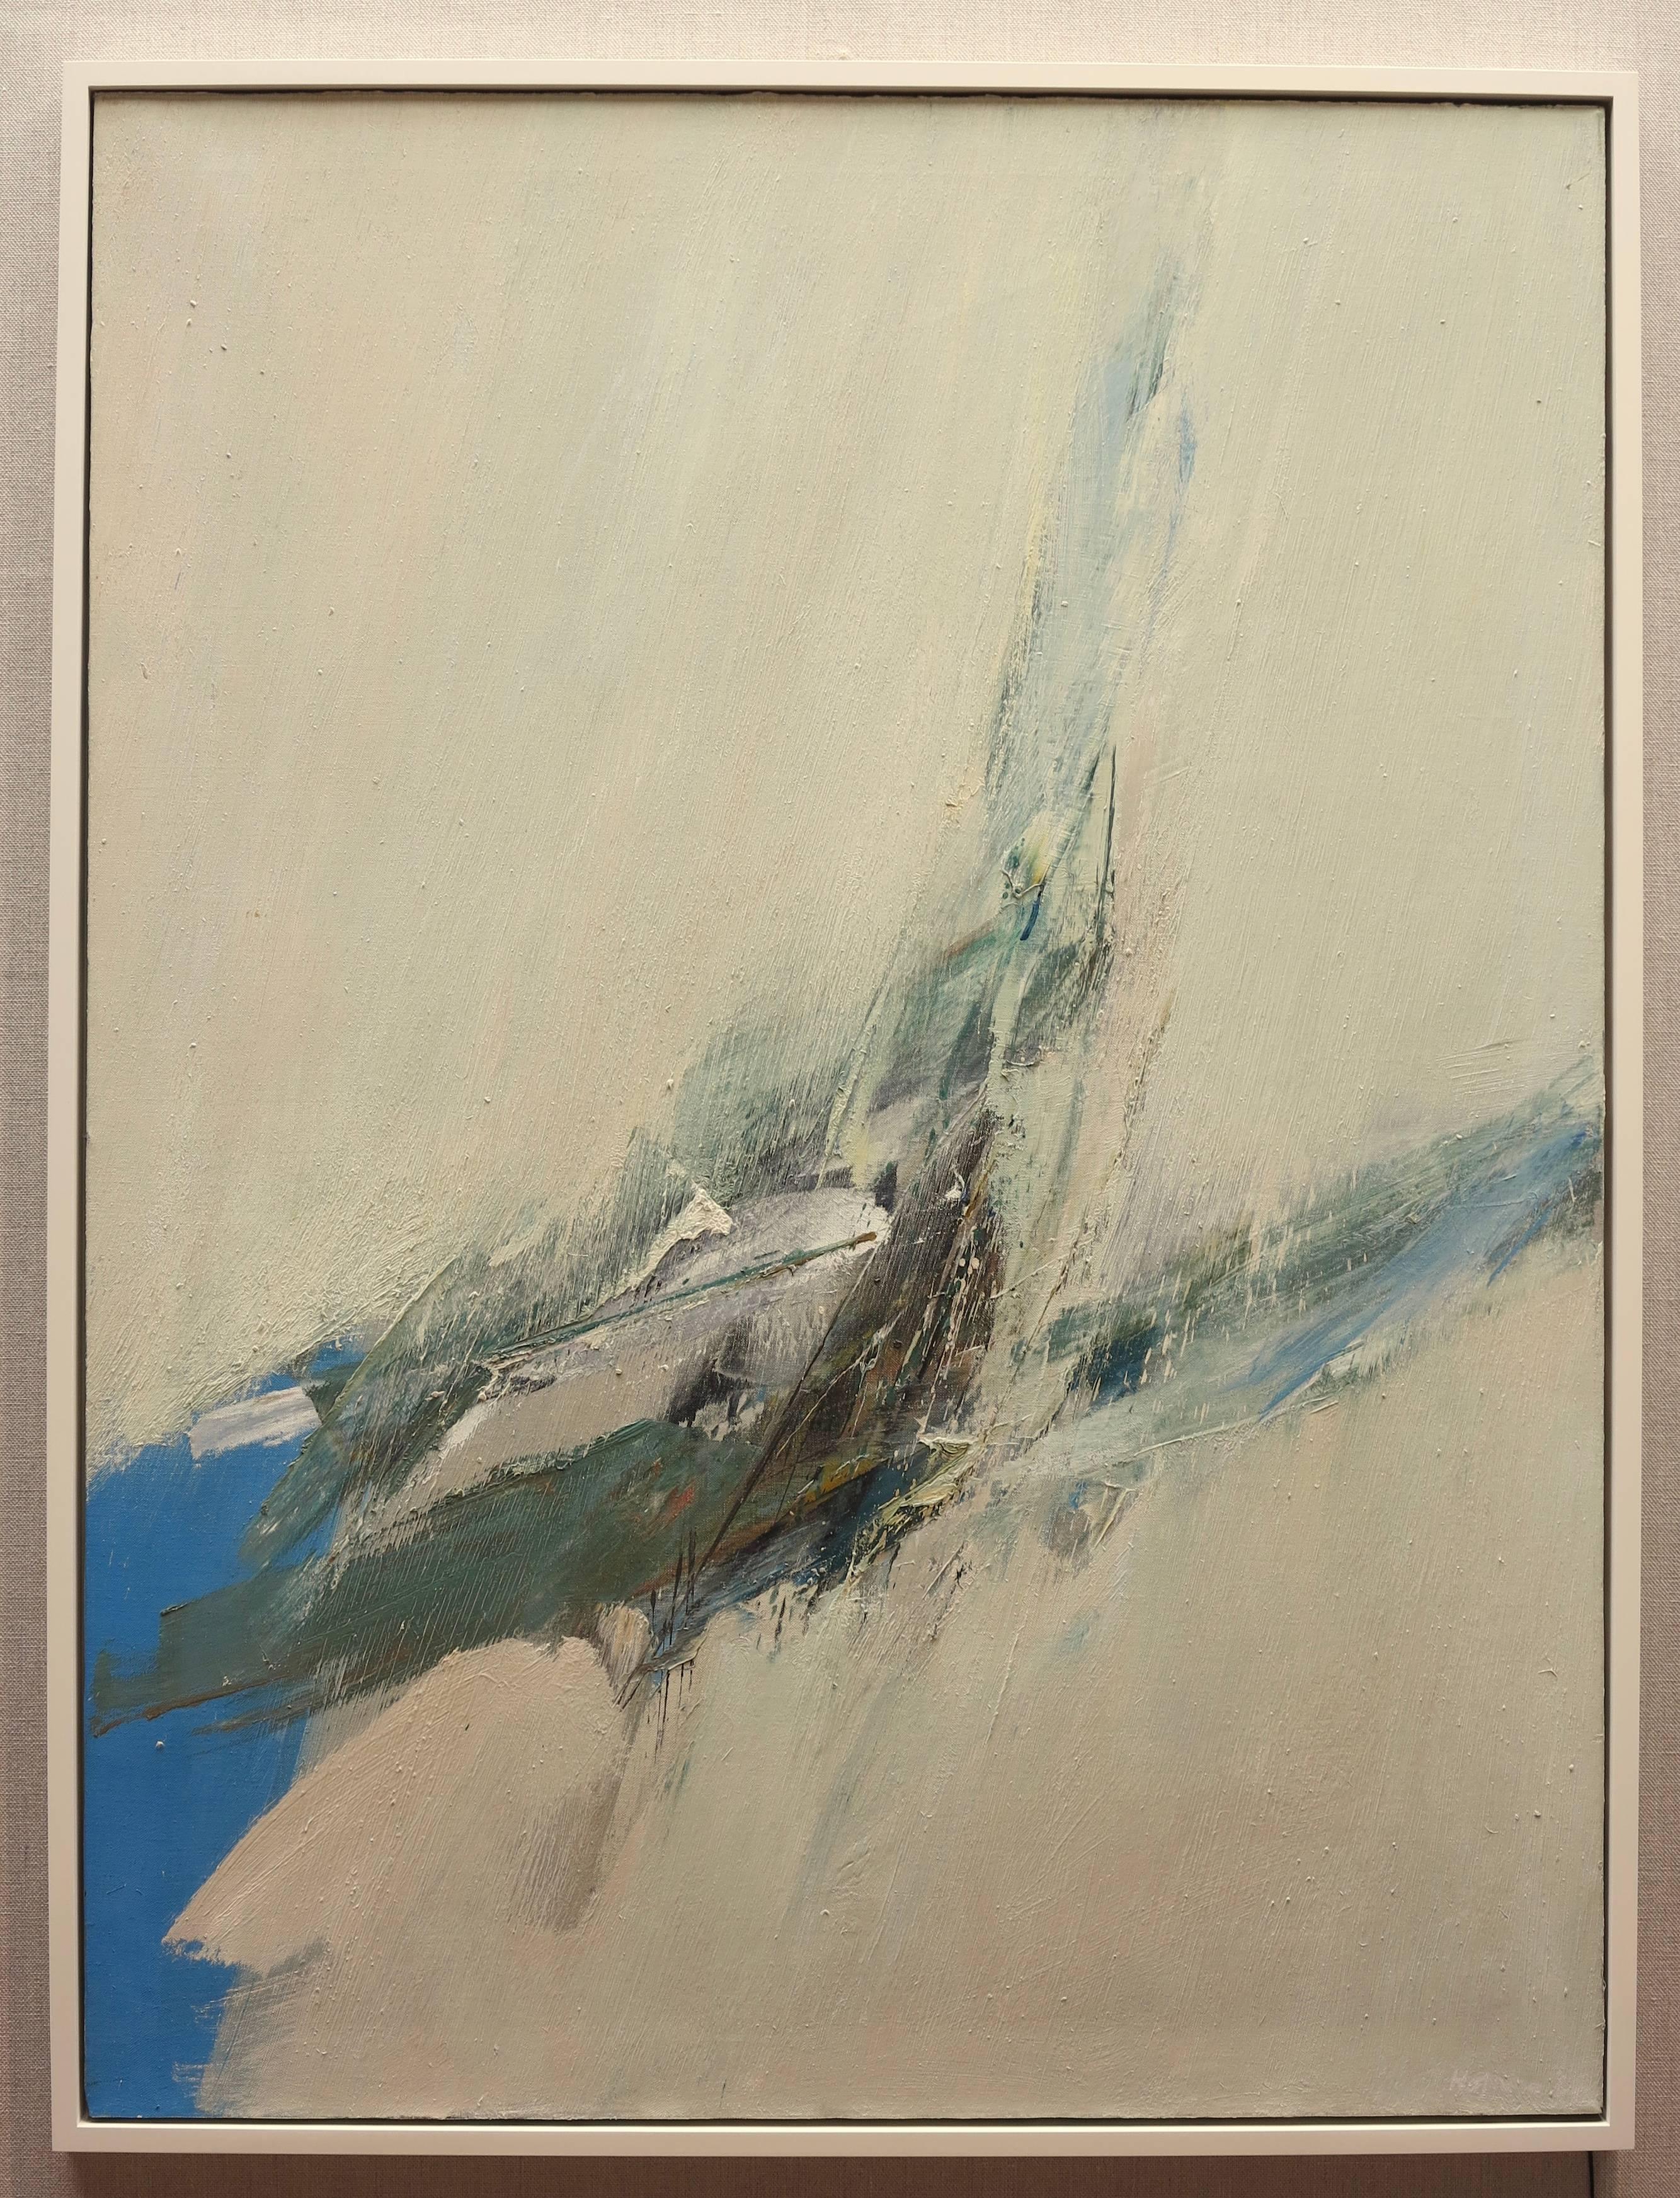 Panmure, 1964 (abstract expressionist painting) - Painting by Budd Hopkins